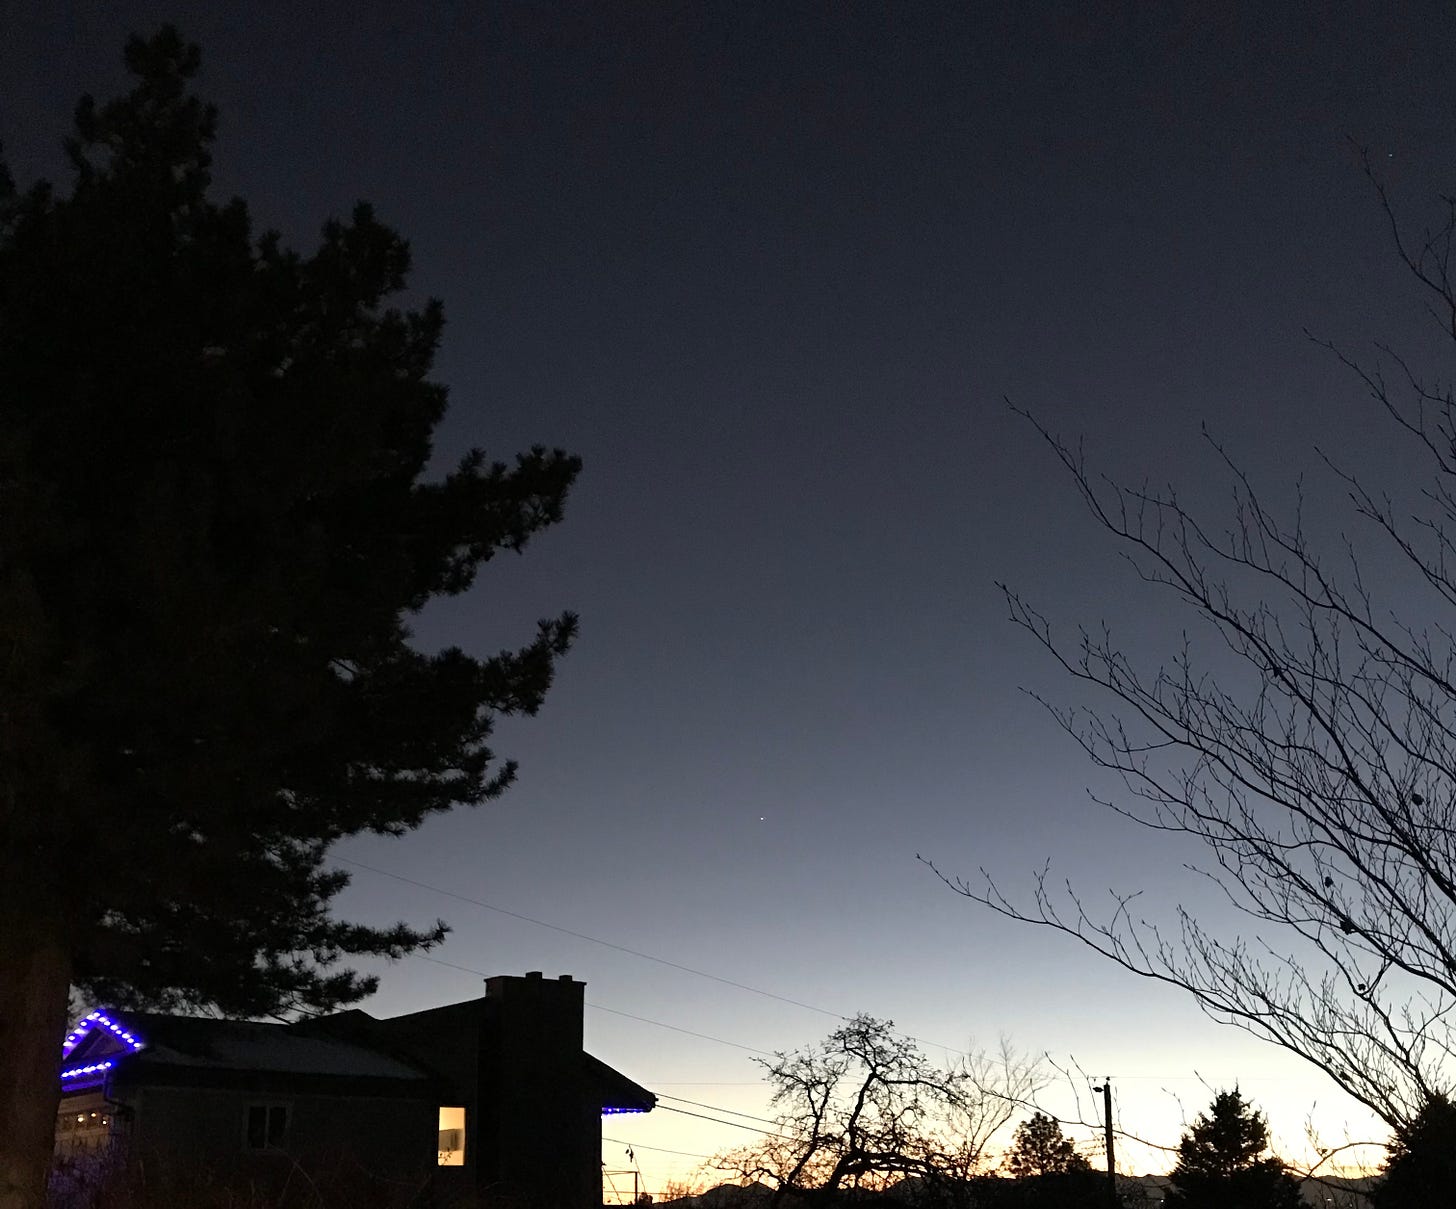 A view of the great conjunction of Saturn and Venus. The white dot of the two planets kissing is barely visible in the bottom third of the sky, which is a slate with gradient to yellow above mountains. In the foreground are a house with one lit window, a giant evergreen (black) on the left, and a branchy tree on the right.